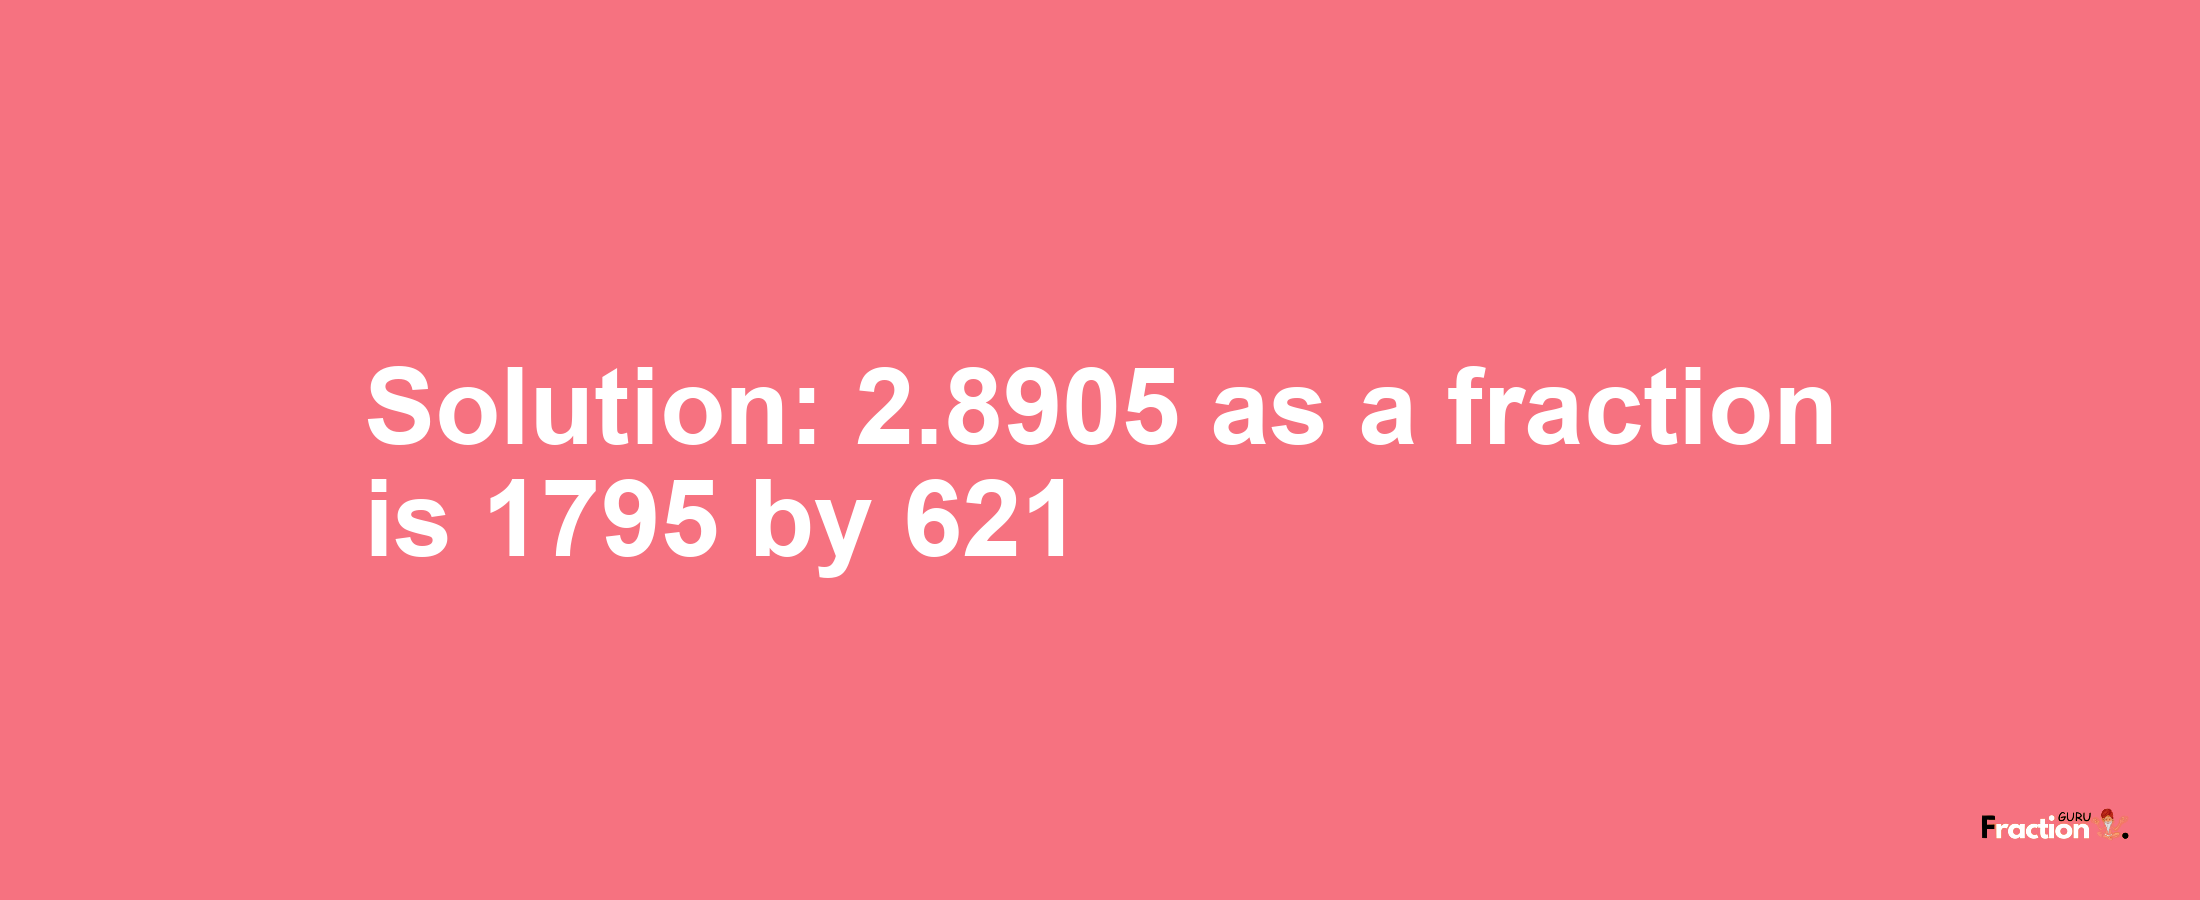 Solution:2.8905 as a fraction is 1795/621